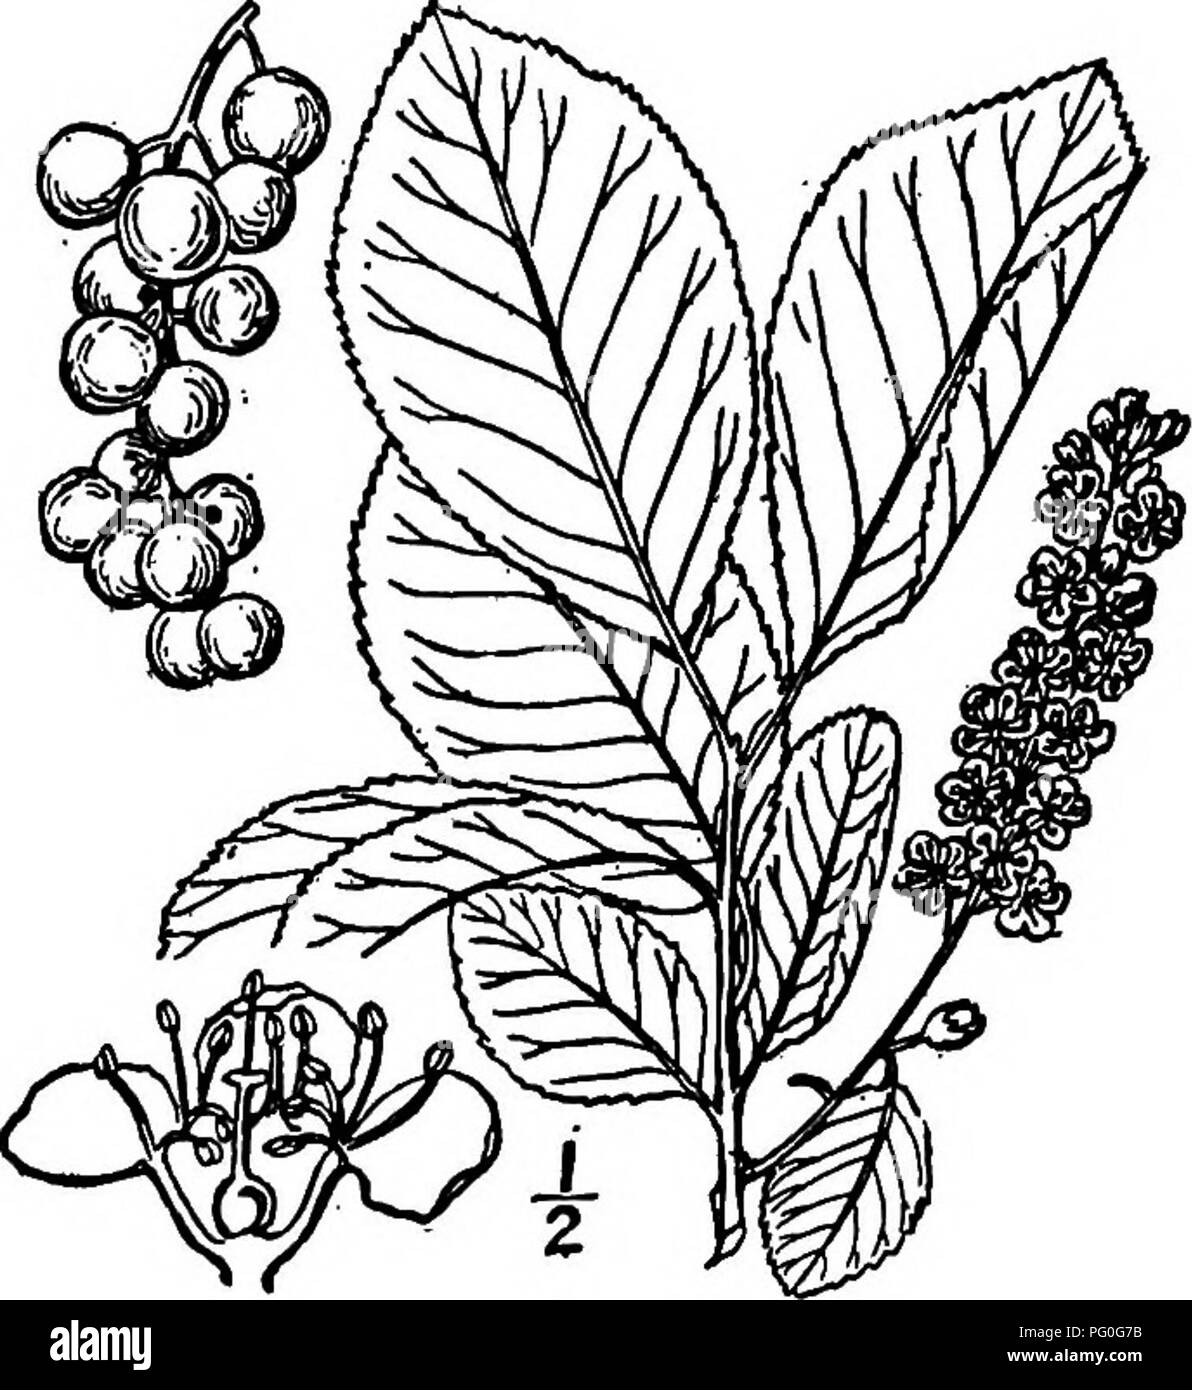 . North American trees : being descriptions and illustrations of the trees growing independently of cultivation in North America, north of Mexico and the West Indies . Trees. Choke Cherry 503 Hairy on young shoots, raceme-axis, and pedicels. Leaves pale or glaucous beneath, at least when old, and nearly glabrous beneath, except along veins. Leaves obovate, rounded at apex; drupe red. Leaves oblong to ovate or elliptic, obtuse to acuminate; drupe purple. Leaves densely brown persistent-woolly beneath, not glaucous. 6. P. Cuthbertii. 7. P. alabamensis. 8. P. australis. I. CHOKE CHERRY —Padus vir Stock Photo